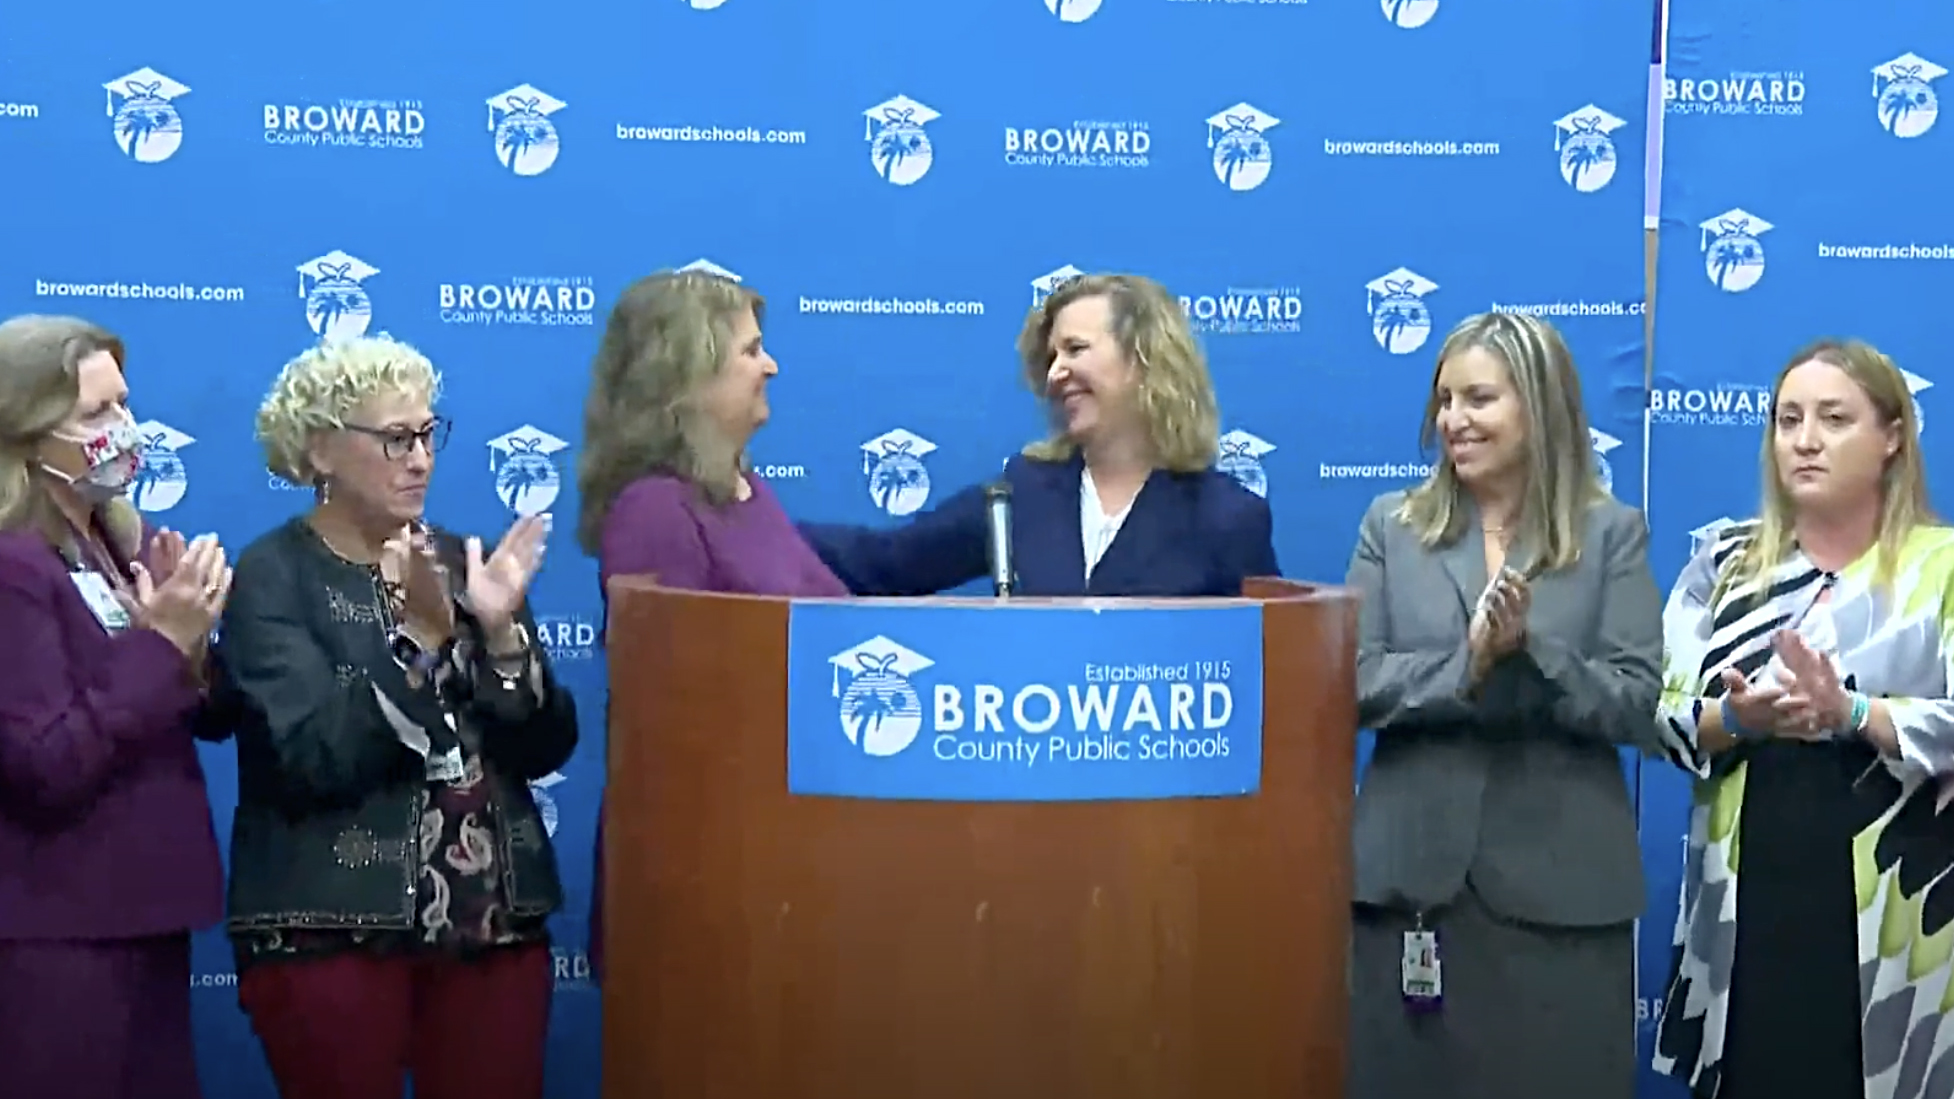 Press conference after announcement was made on the selection of Dr. Vickie L. Cartwright.